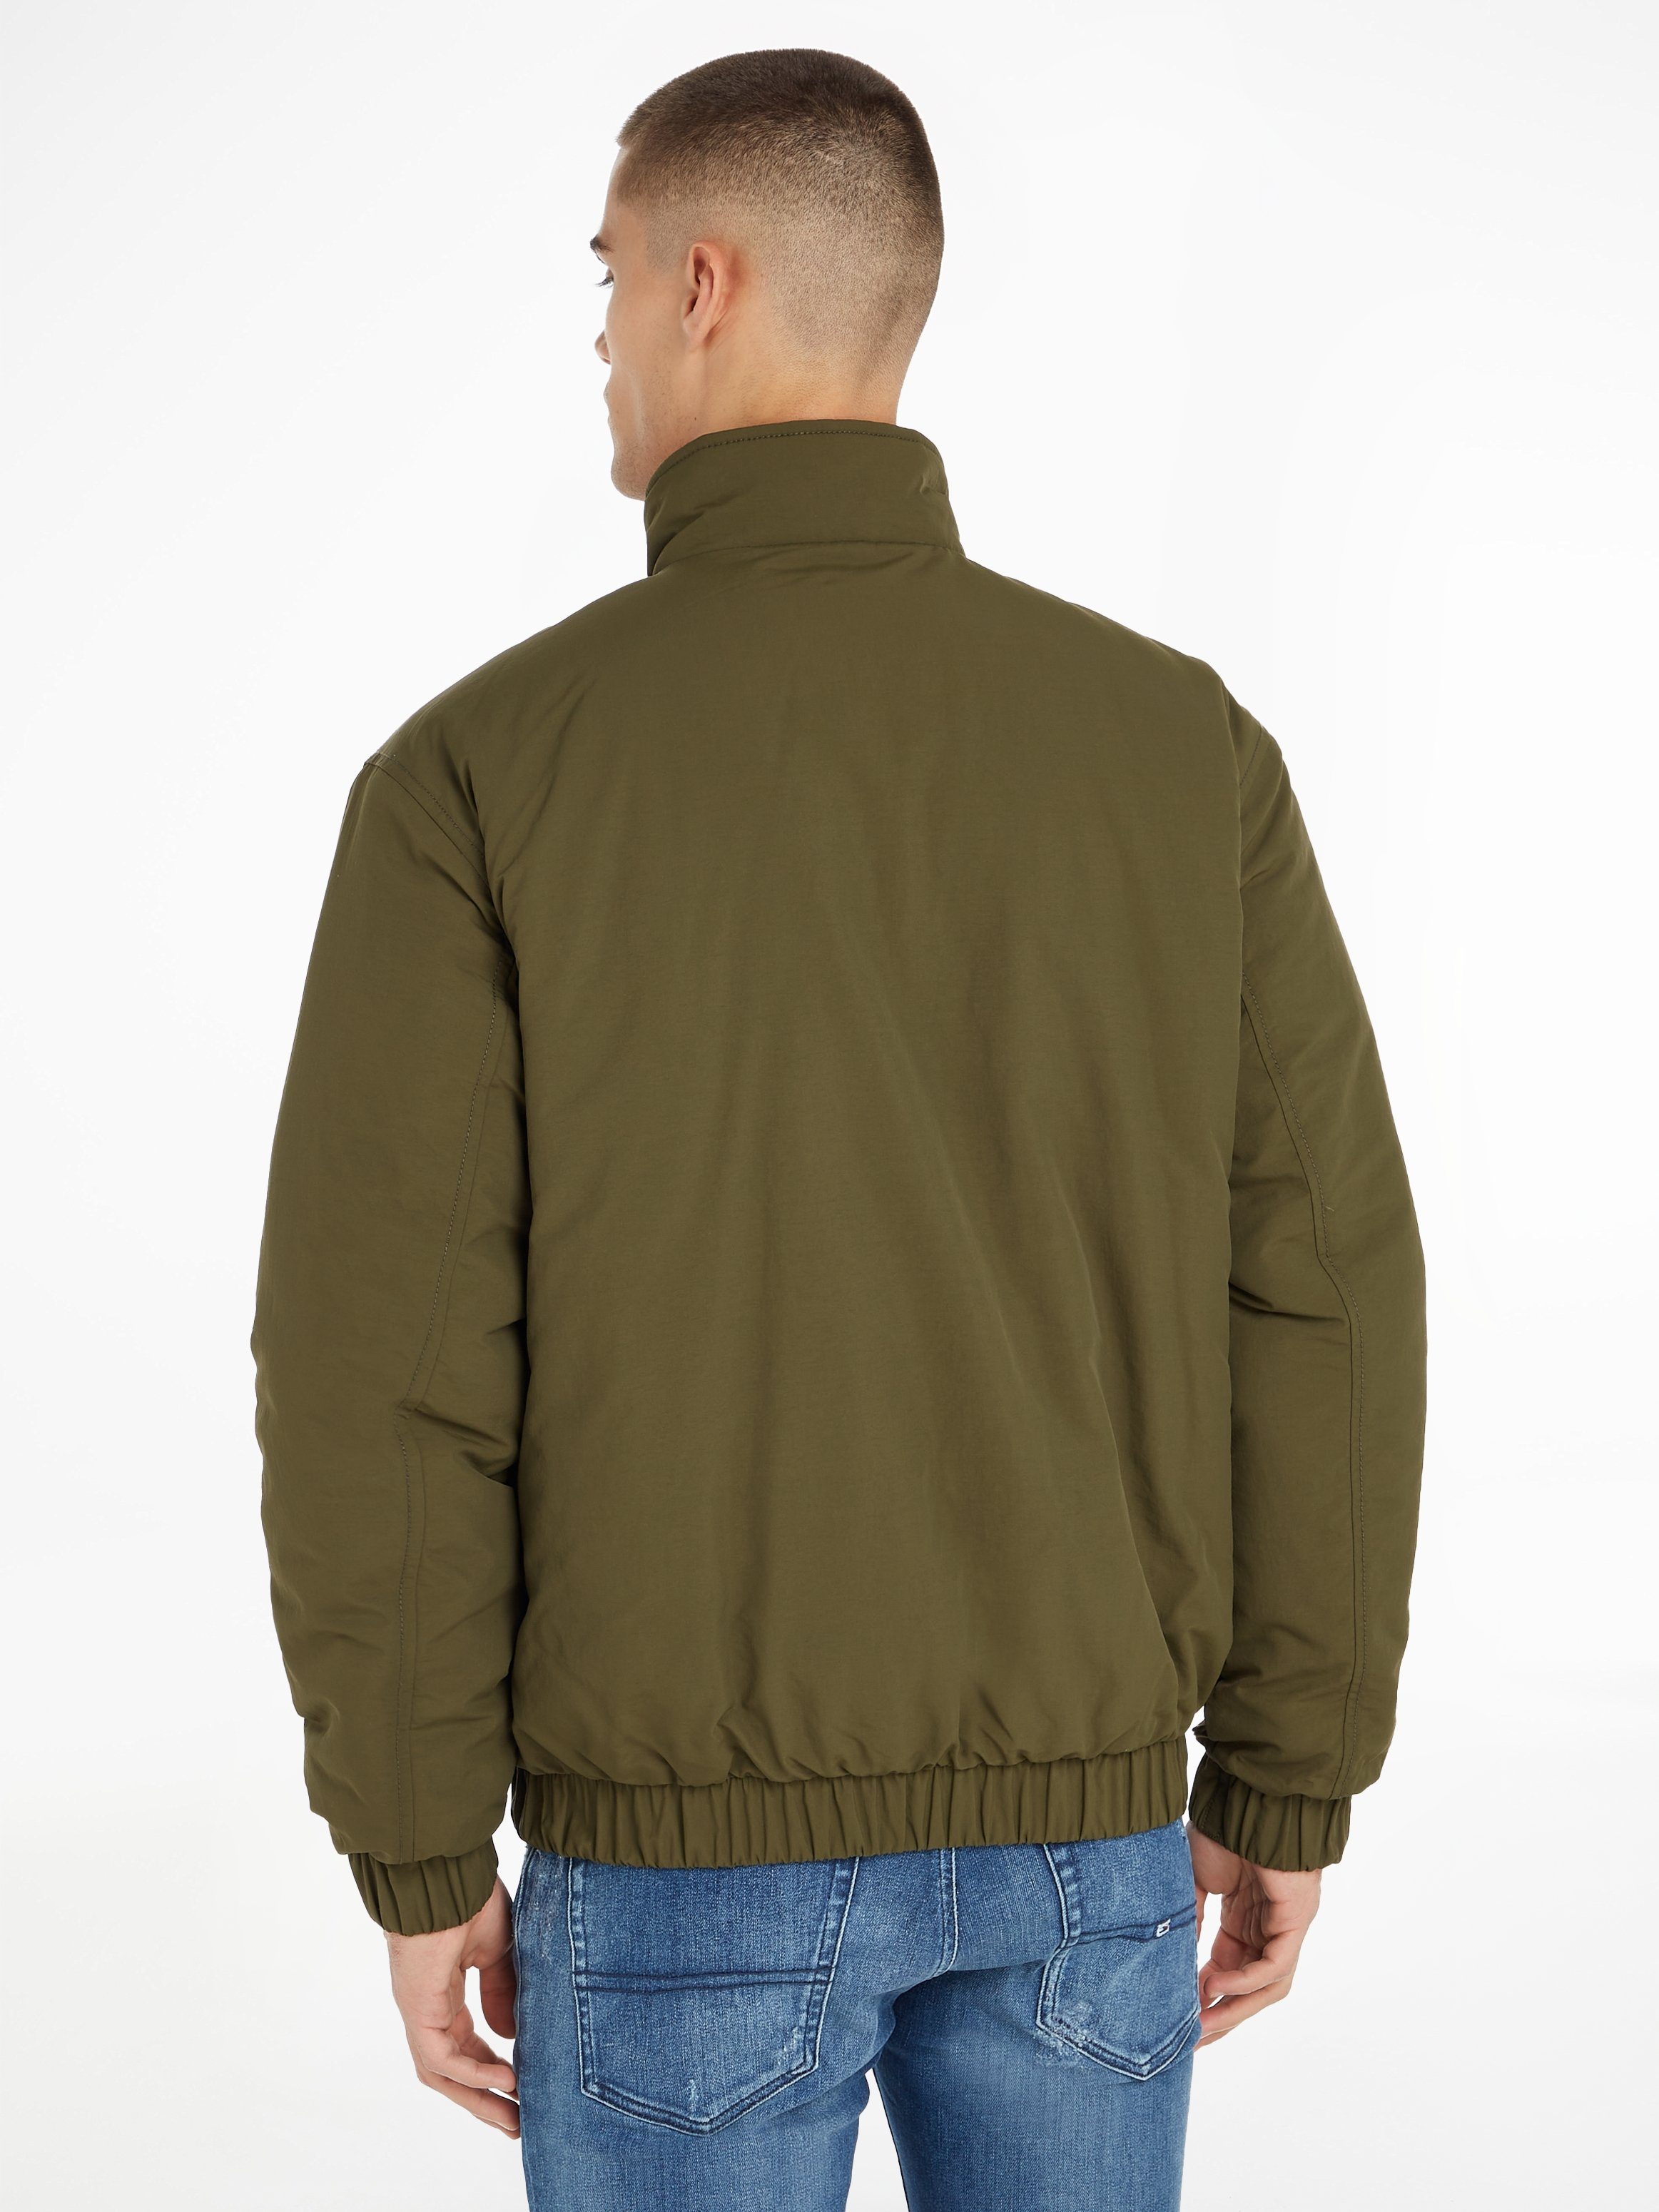 Tommy Jeans Blouson JACKET Olive TJM Green PADDED ESSENTIAL Drab